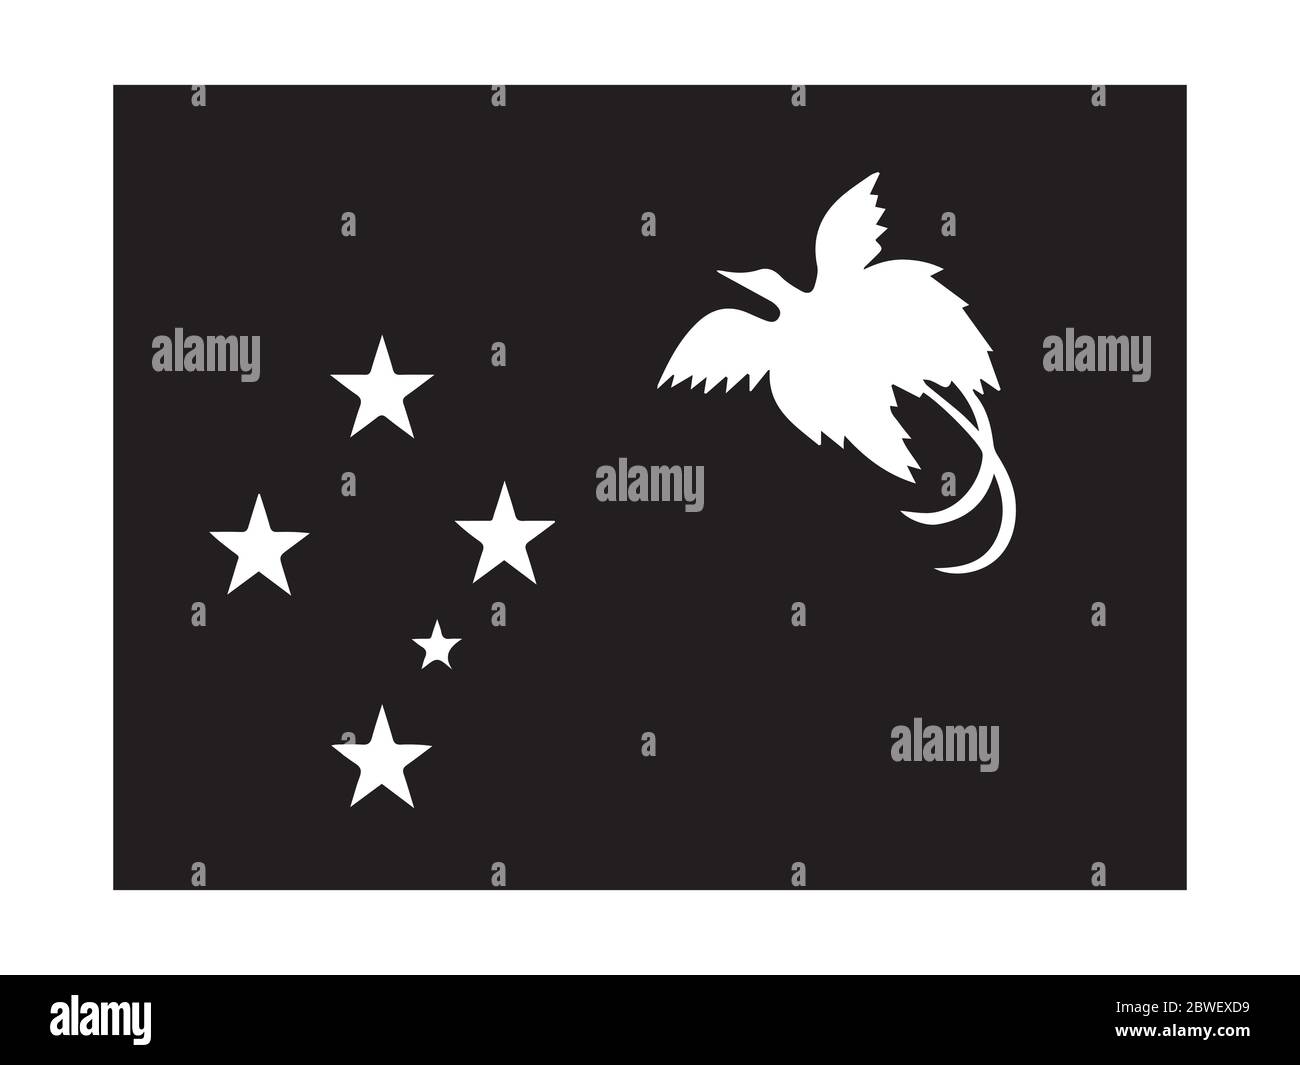 Papua New Guinea Flag Black and White. Country National Emblem Banner. Monochrome Grayscale EPS Vector File. Stock Vector